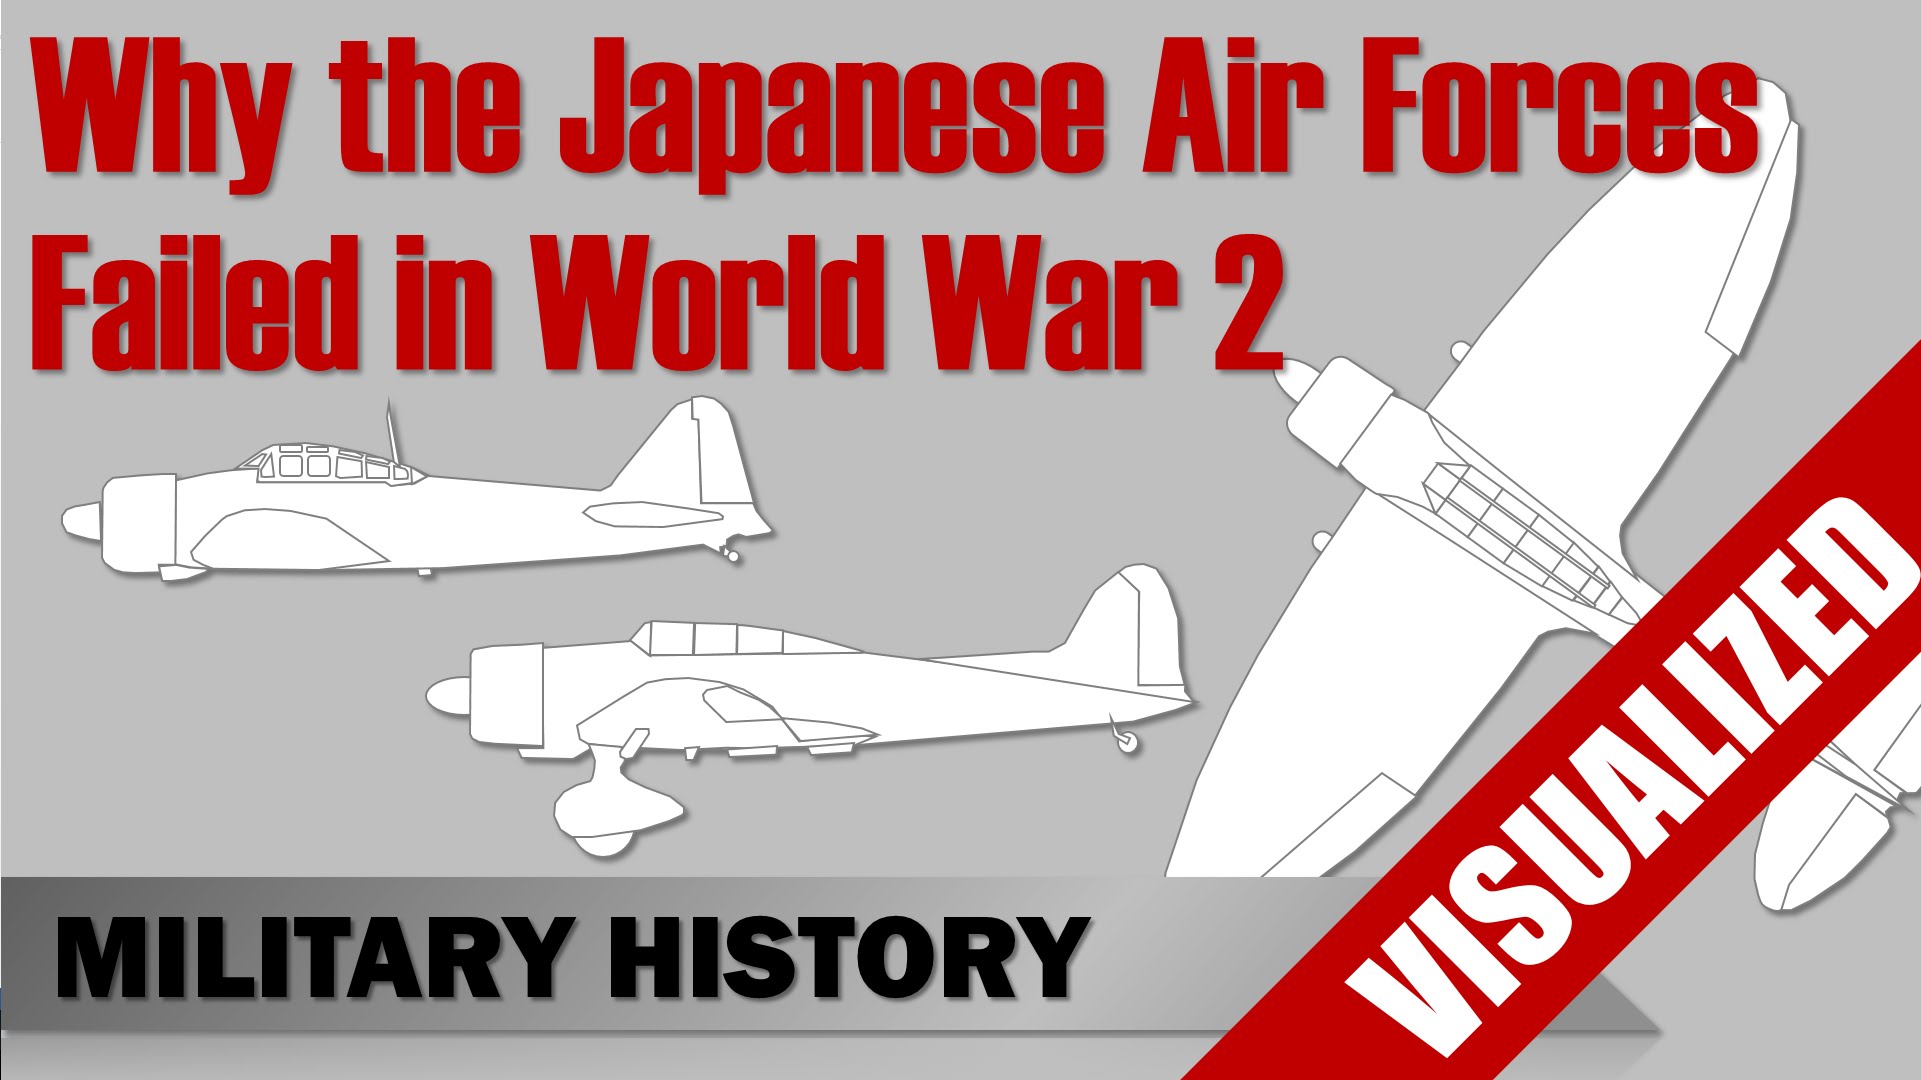 Why the Japanese Air Forces failed in World War 2